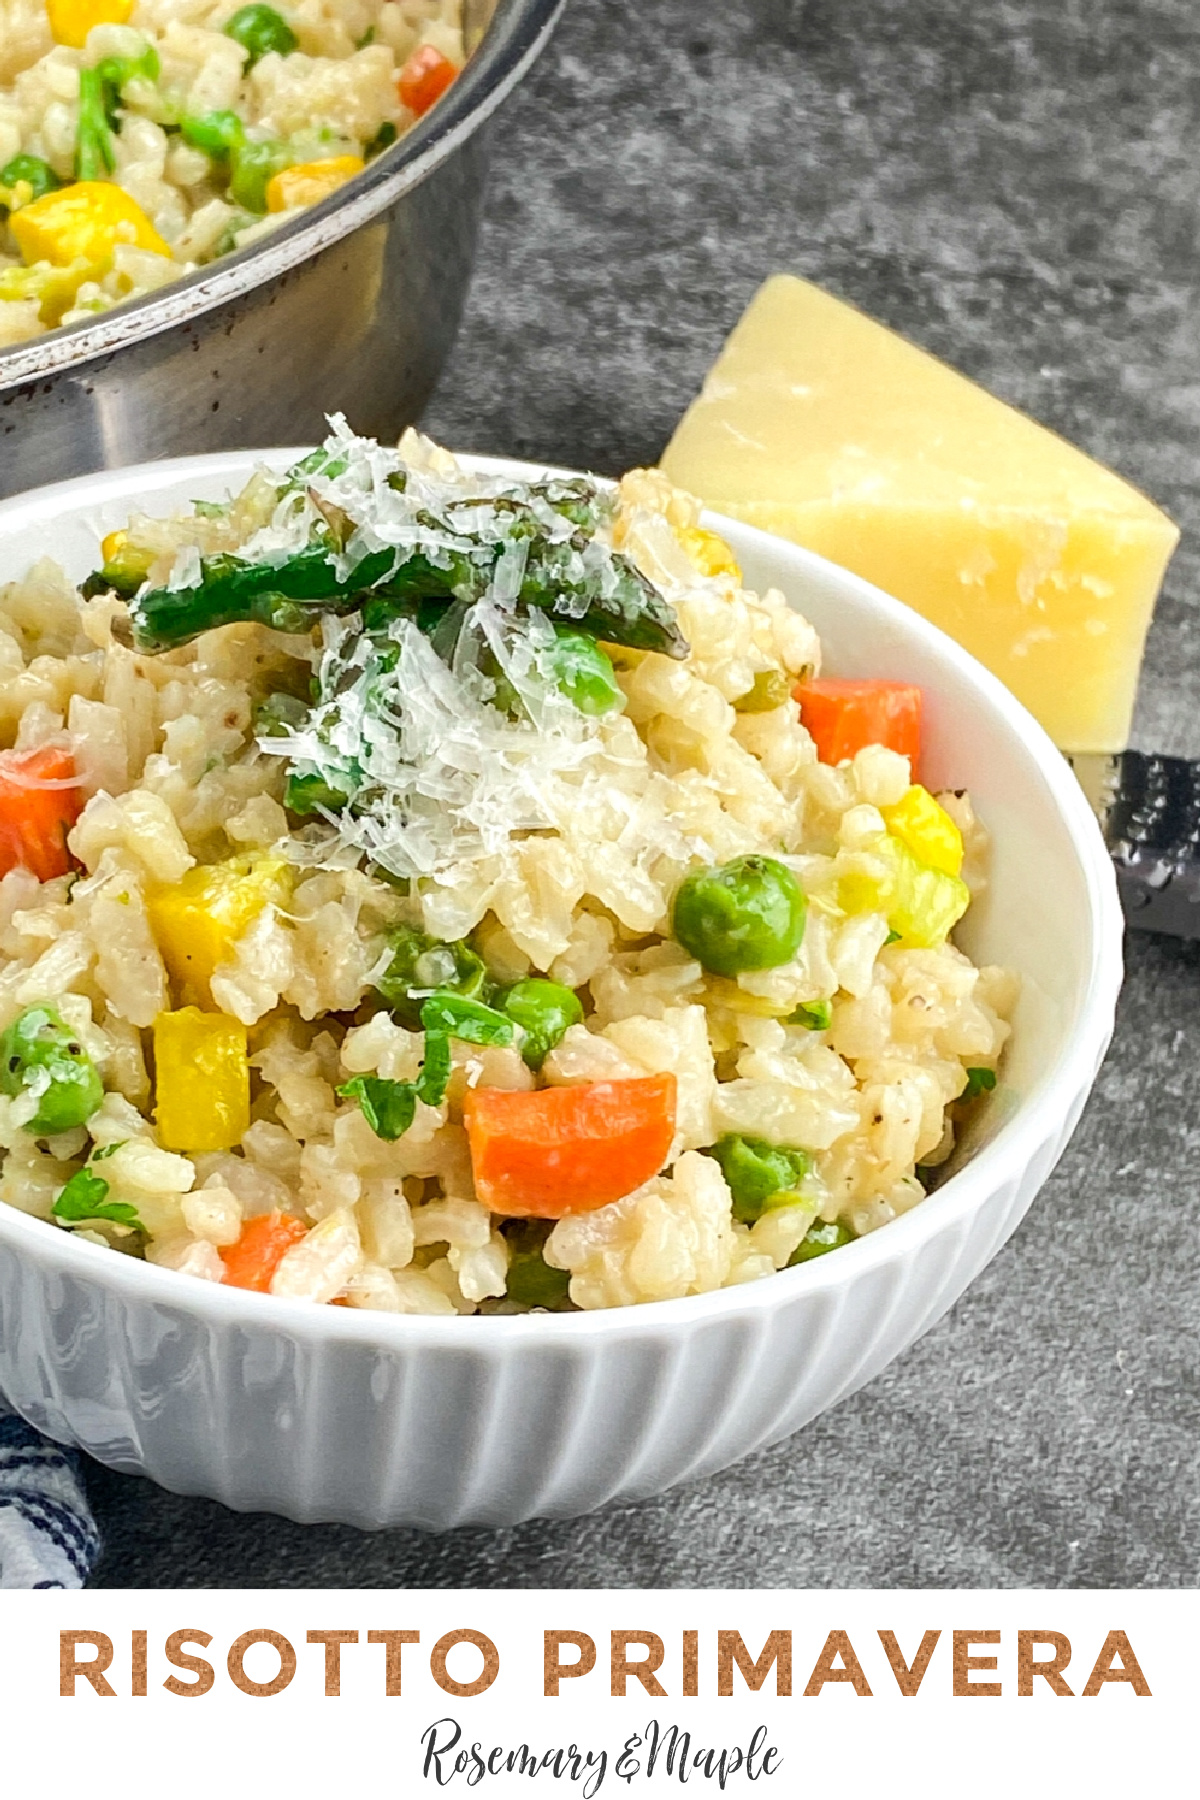 Our risotto primavera recipe is a cheesy risotto dish filled with veggies. It's a perfect side dish or main course for any season!